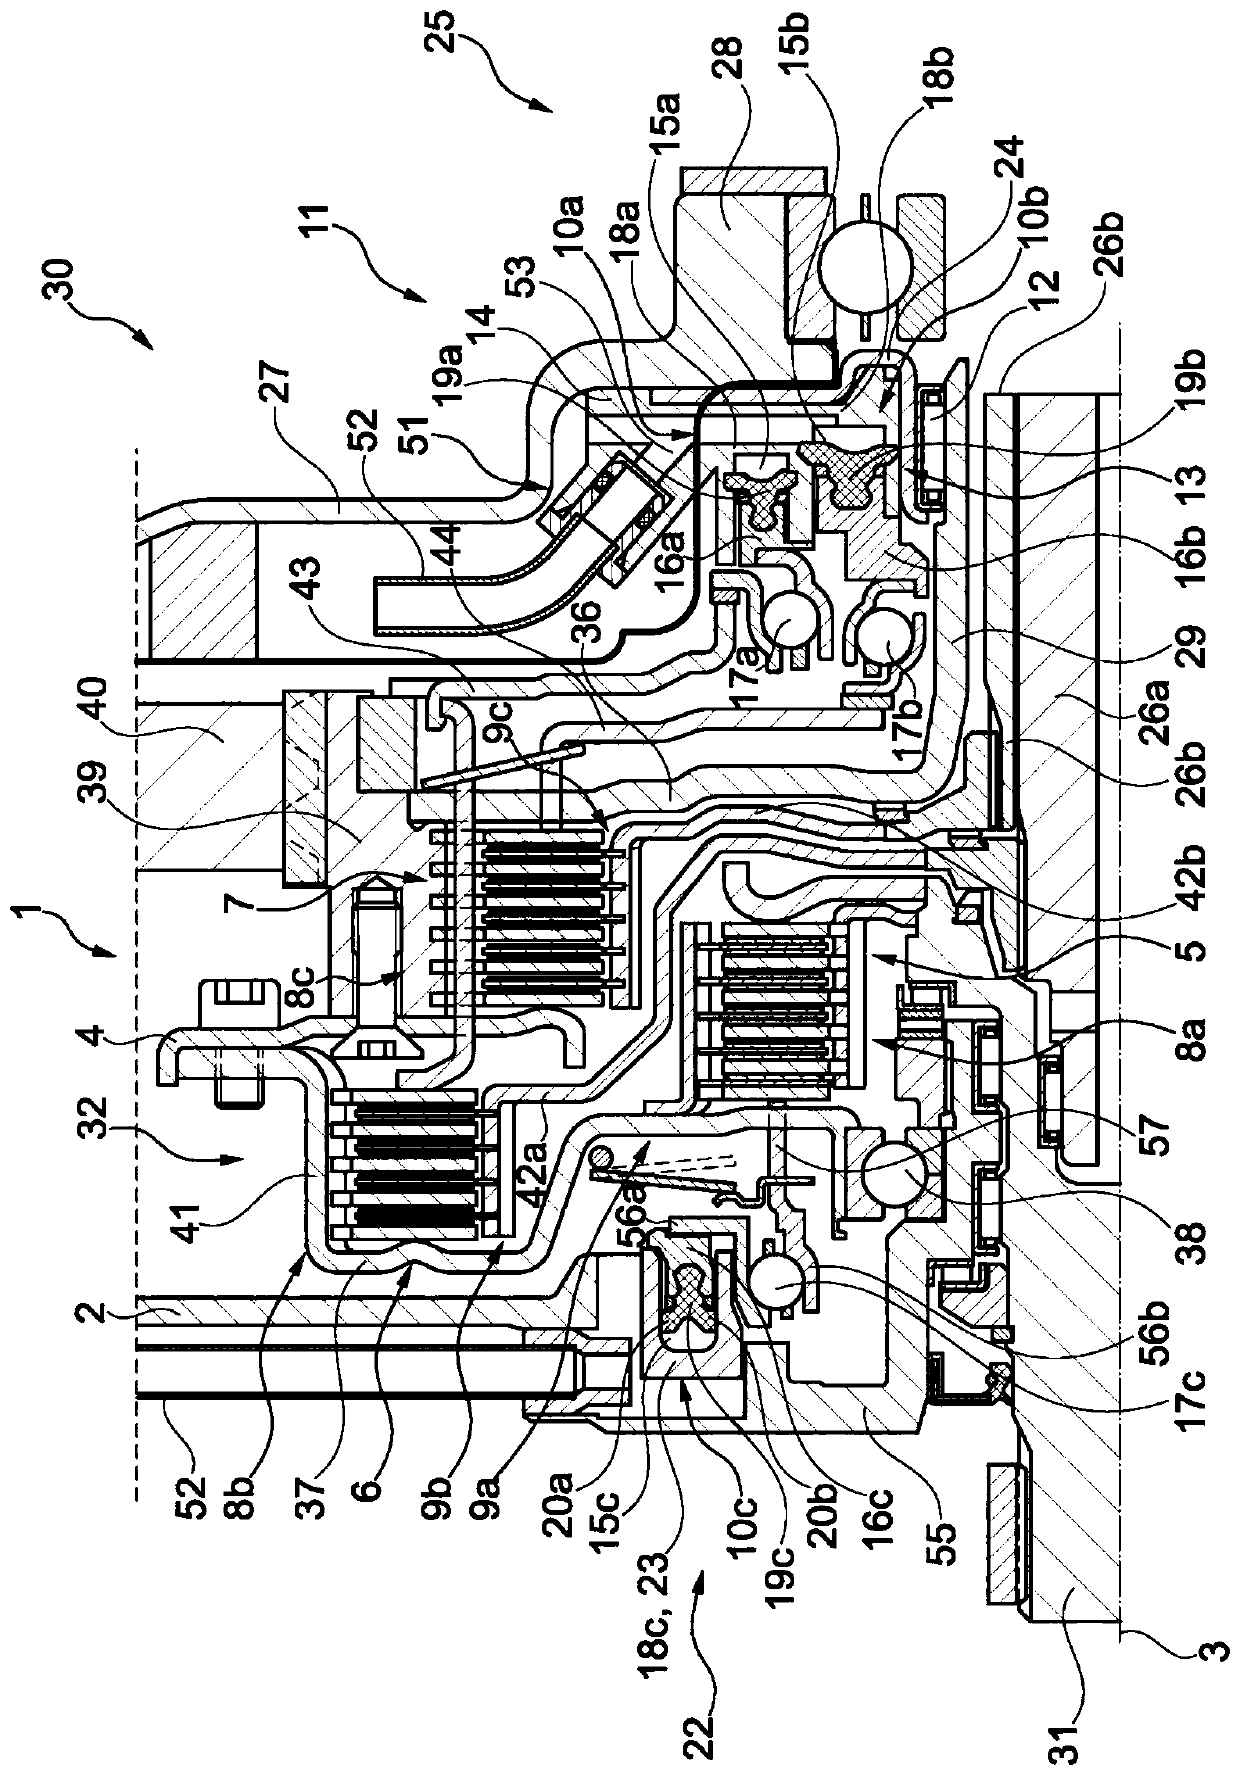 Clutch system with bearing in actuating device and drive unit